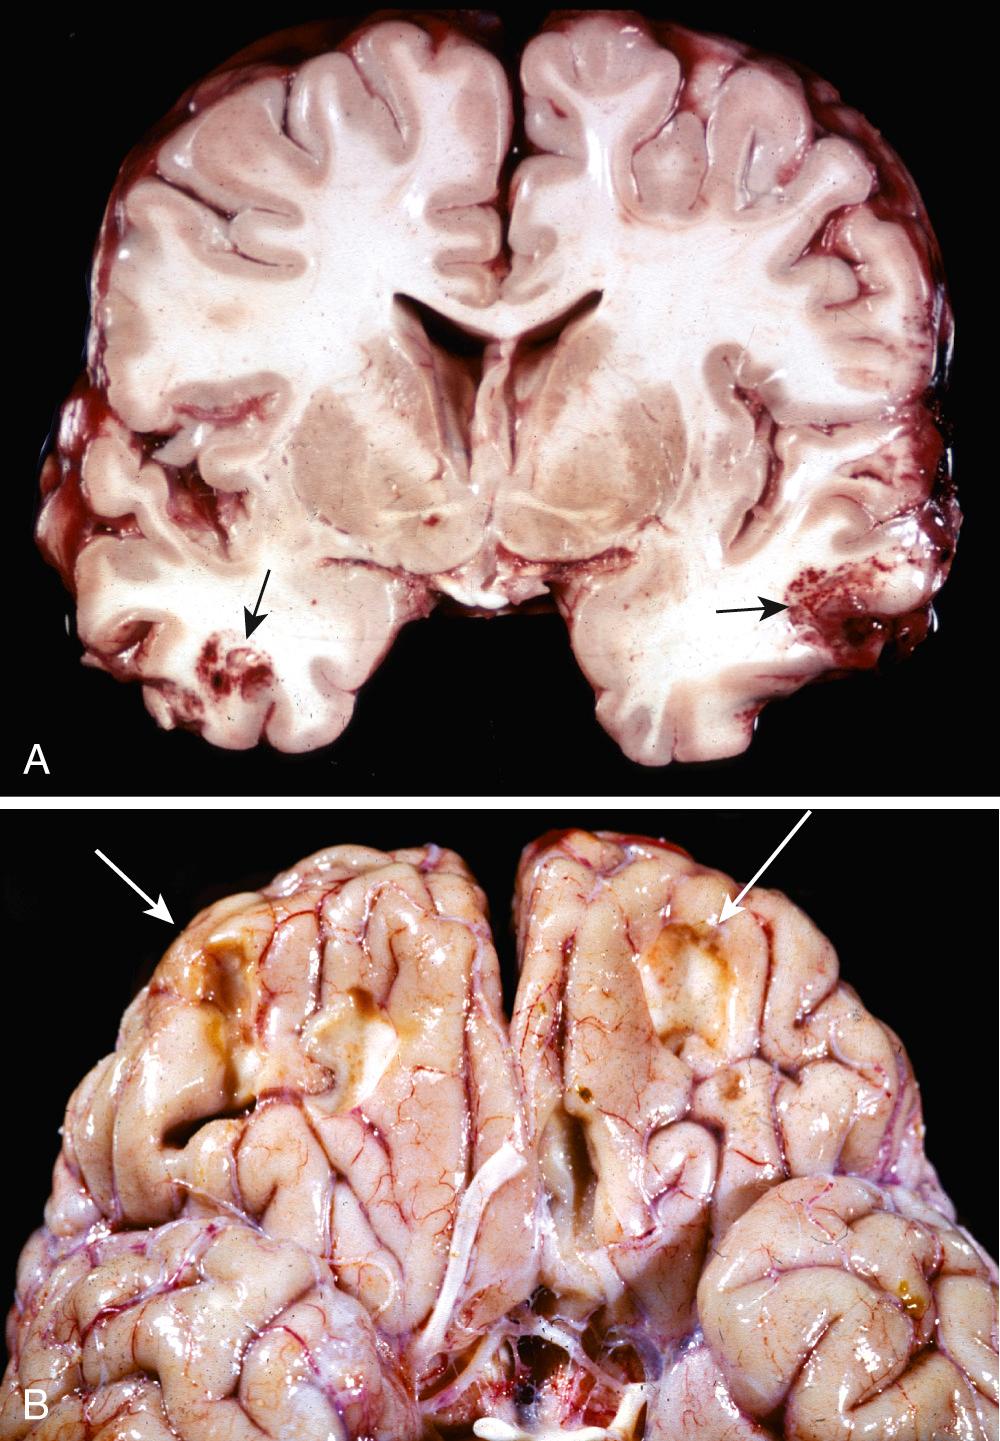 Figure 28.9, (A) Acute contusions are present in both temporal lobes, with areas of hemorrhage and tissue disruption (arrows). (B) Remote contusions (arrows) are present on the inferior frontal surface of this brain and have a yellow color (plaque jaune) that reflects hemosiderin accumulation.